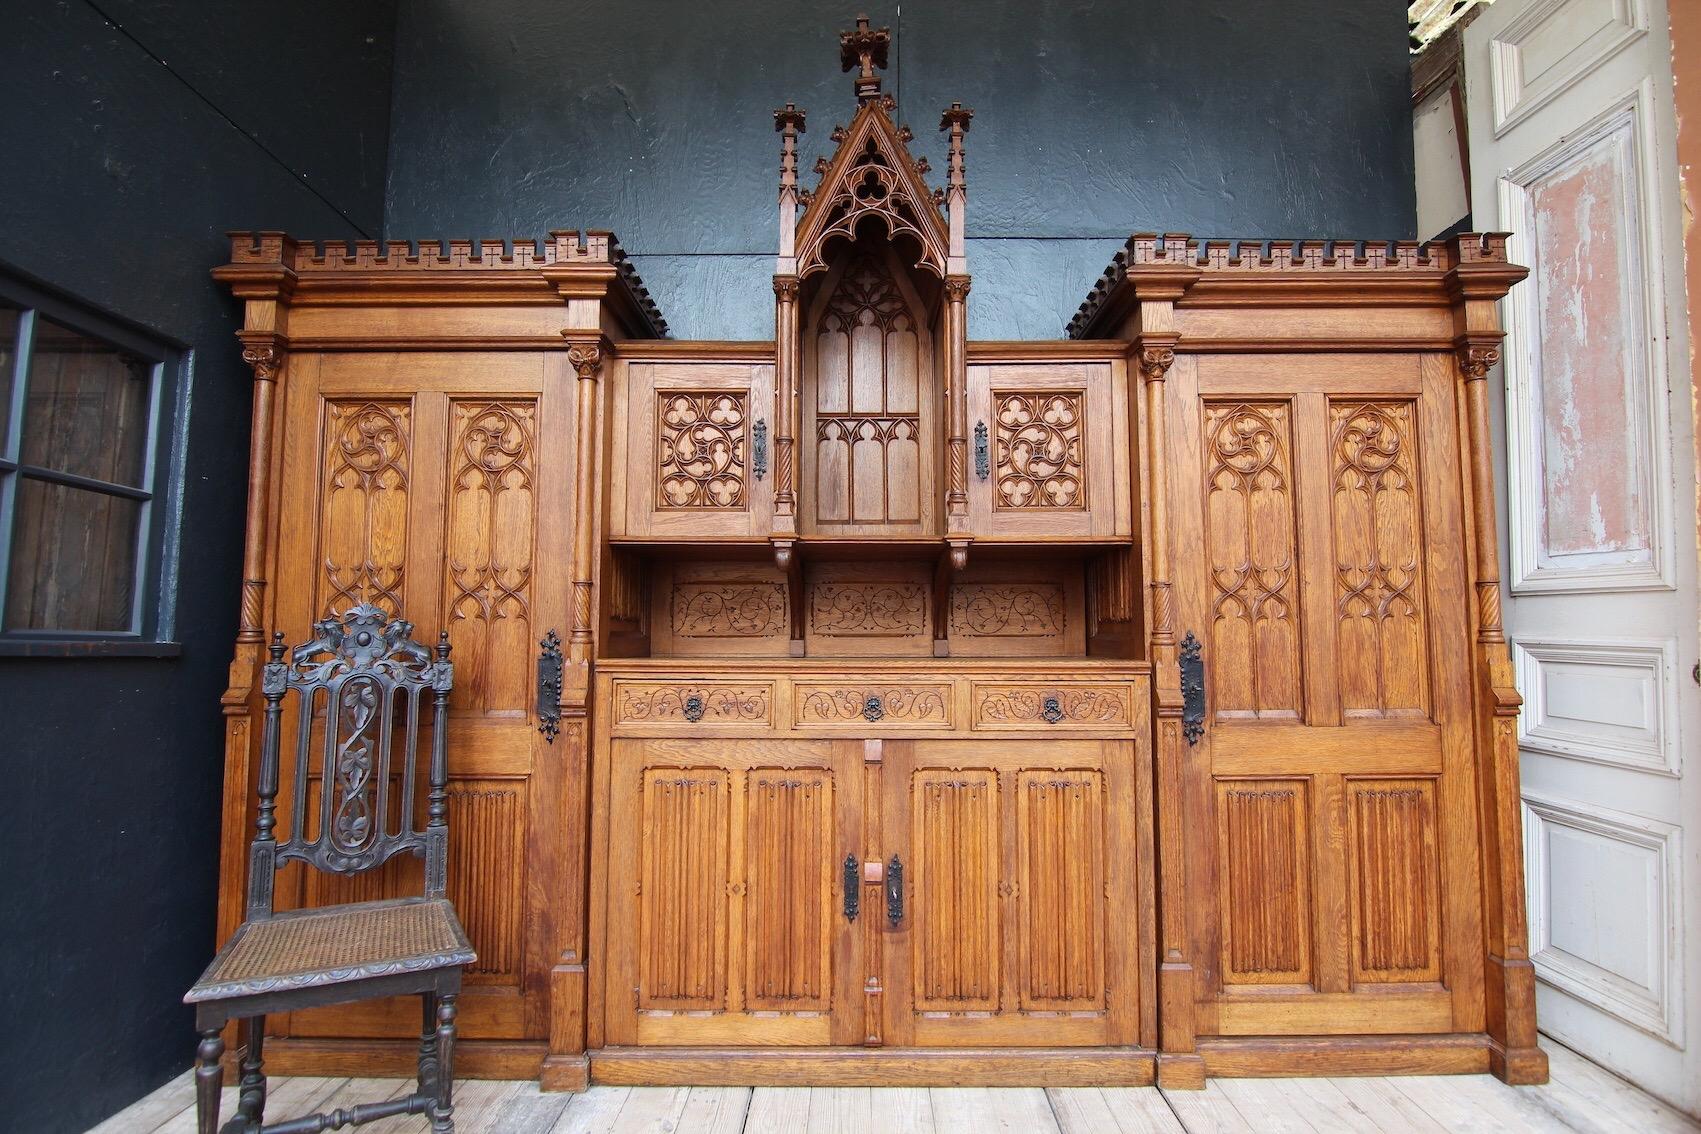 A Gothic Revival sacristy cabinet from the 1920s/30s. The piece of furniture comes from the sacristy of the Brandts Chapel of St. Aloysius in Mönchengladbach.

High-quality oak wood. Richly decorated and carved.

The cabinet consists of a central